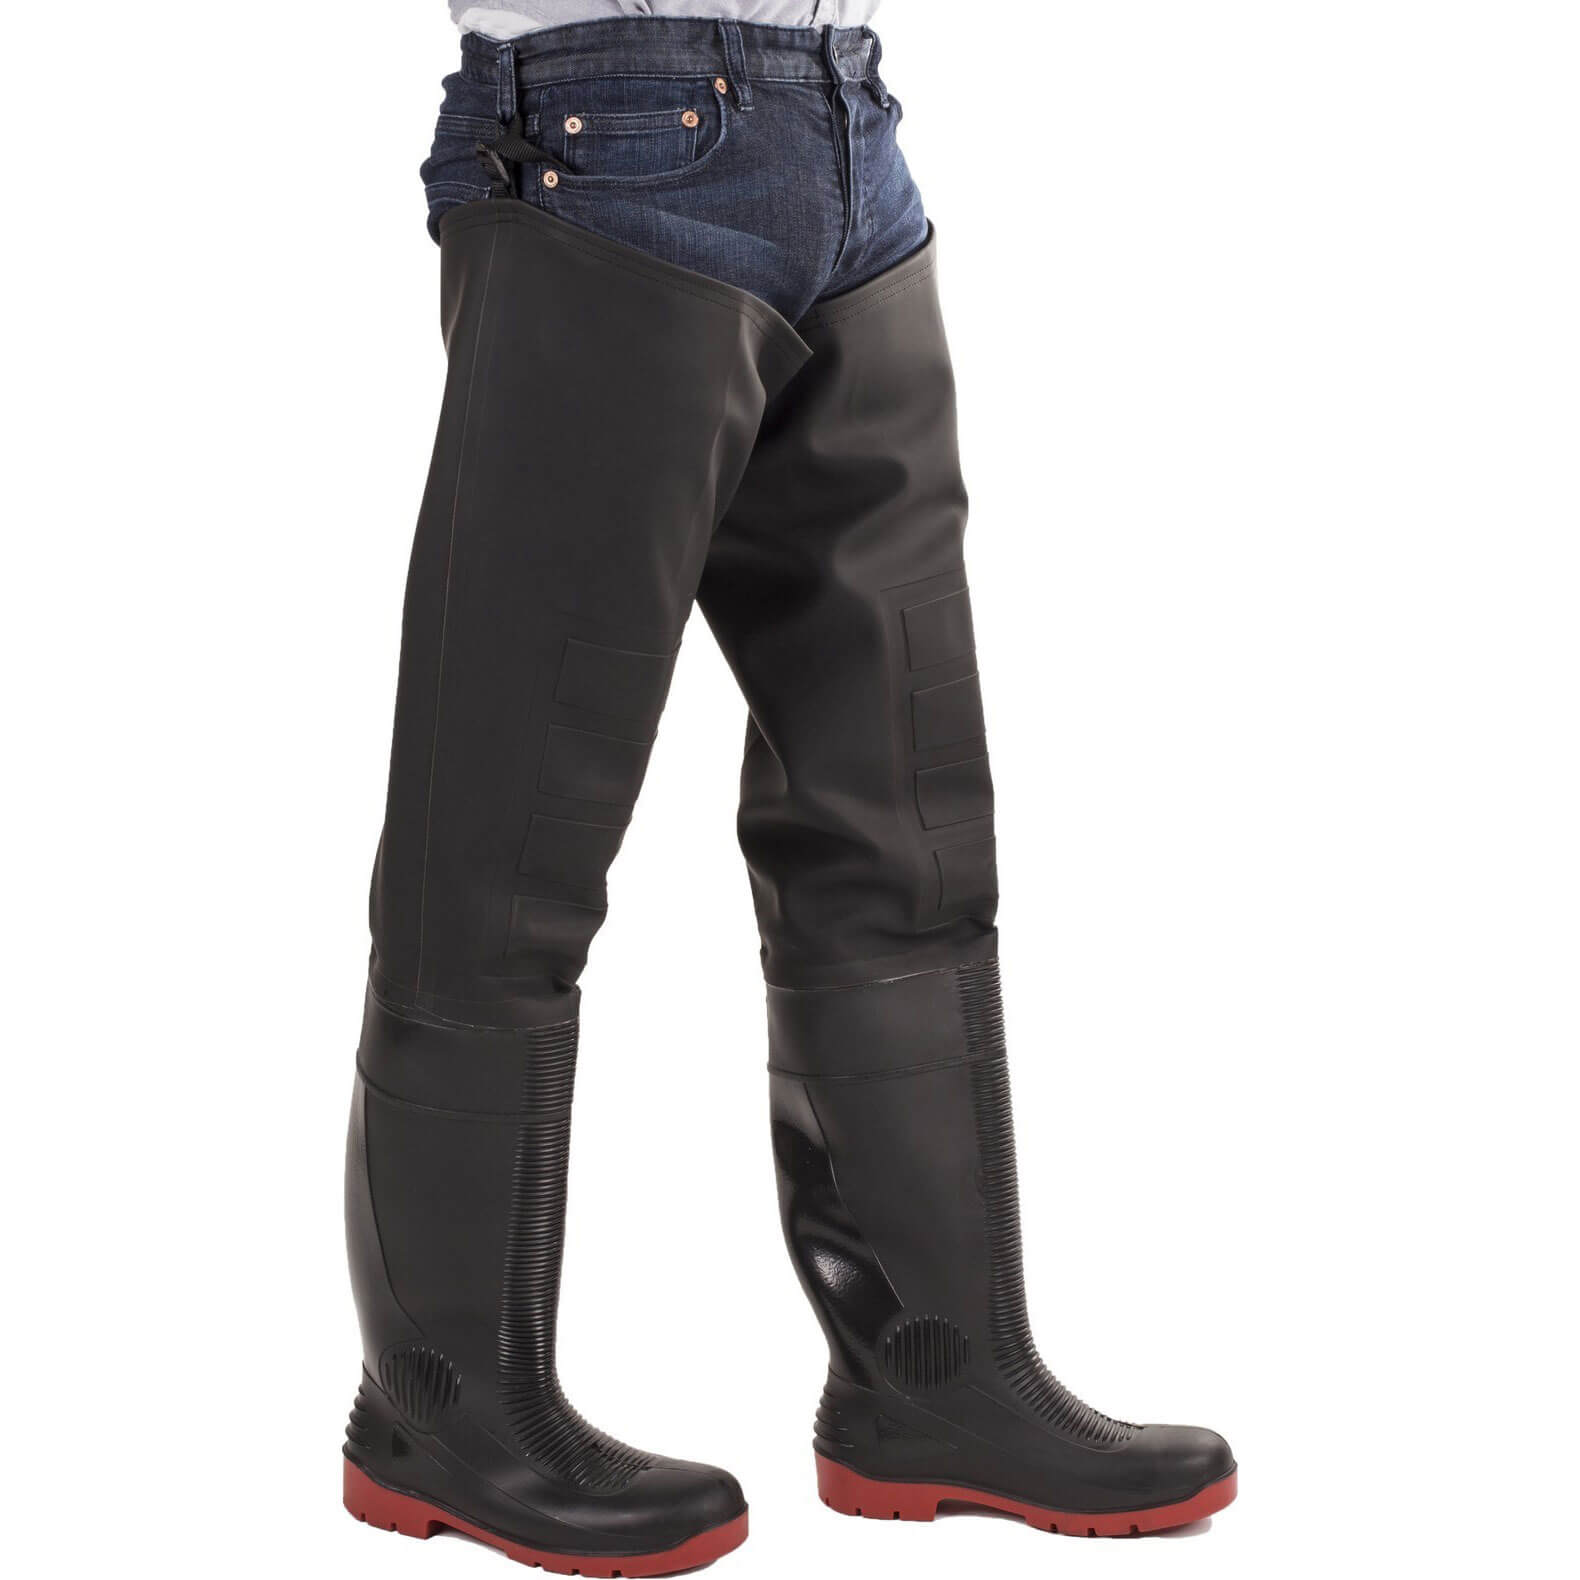 Image of Amblers Safety Rhone Thigh Safety Wader Black / Red Size 5